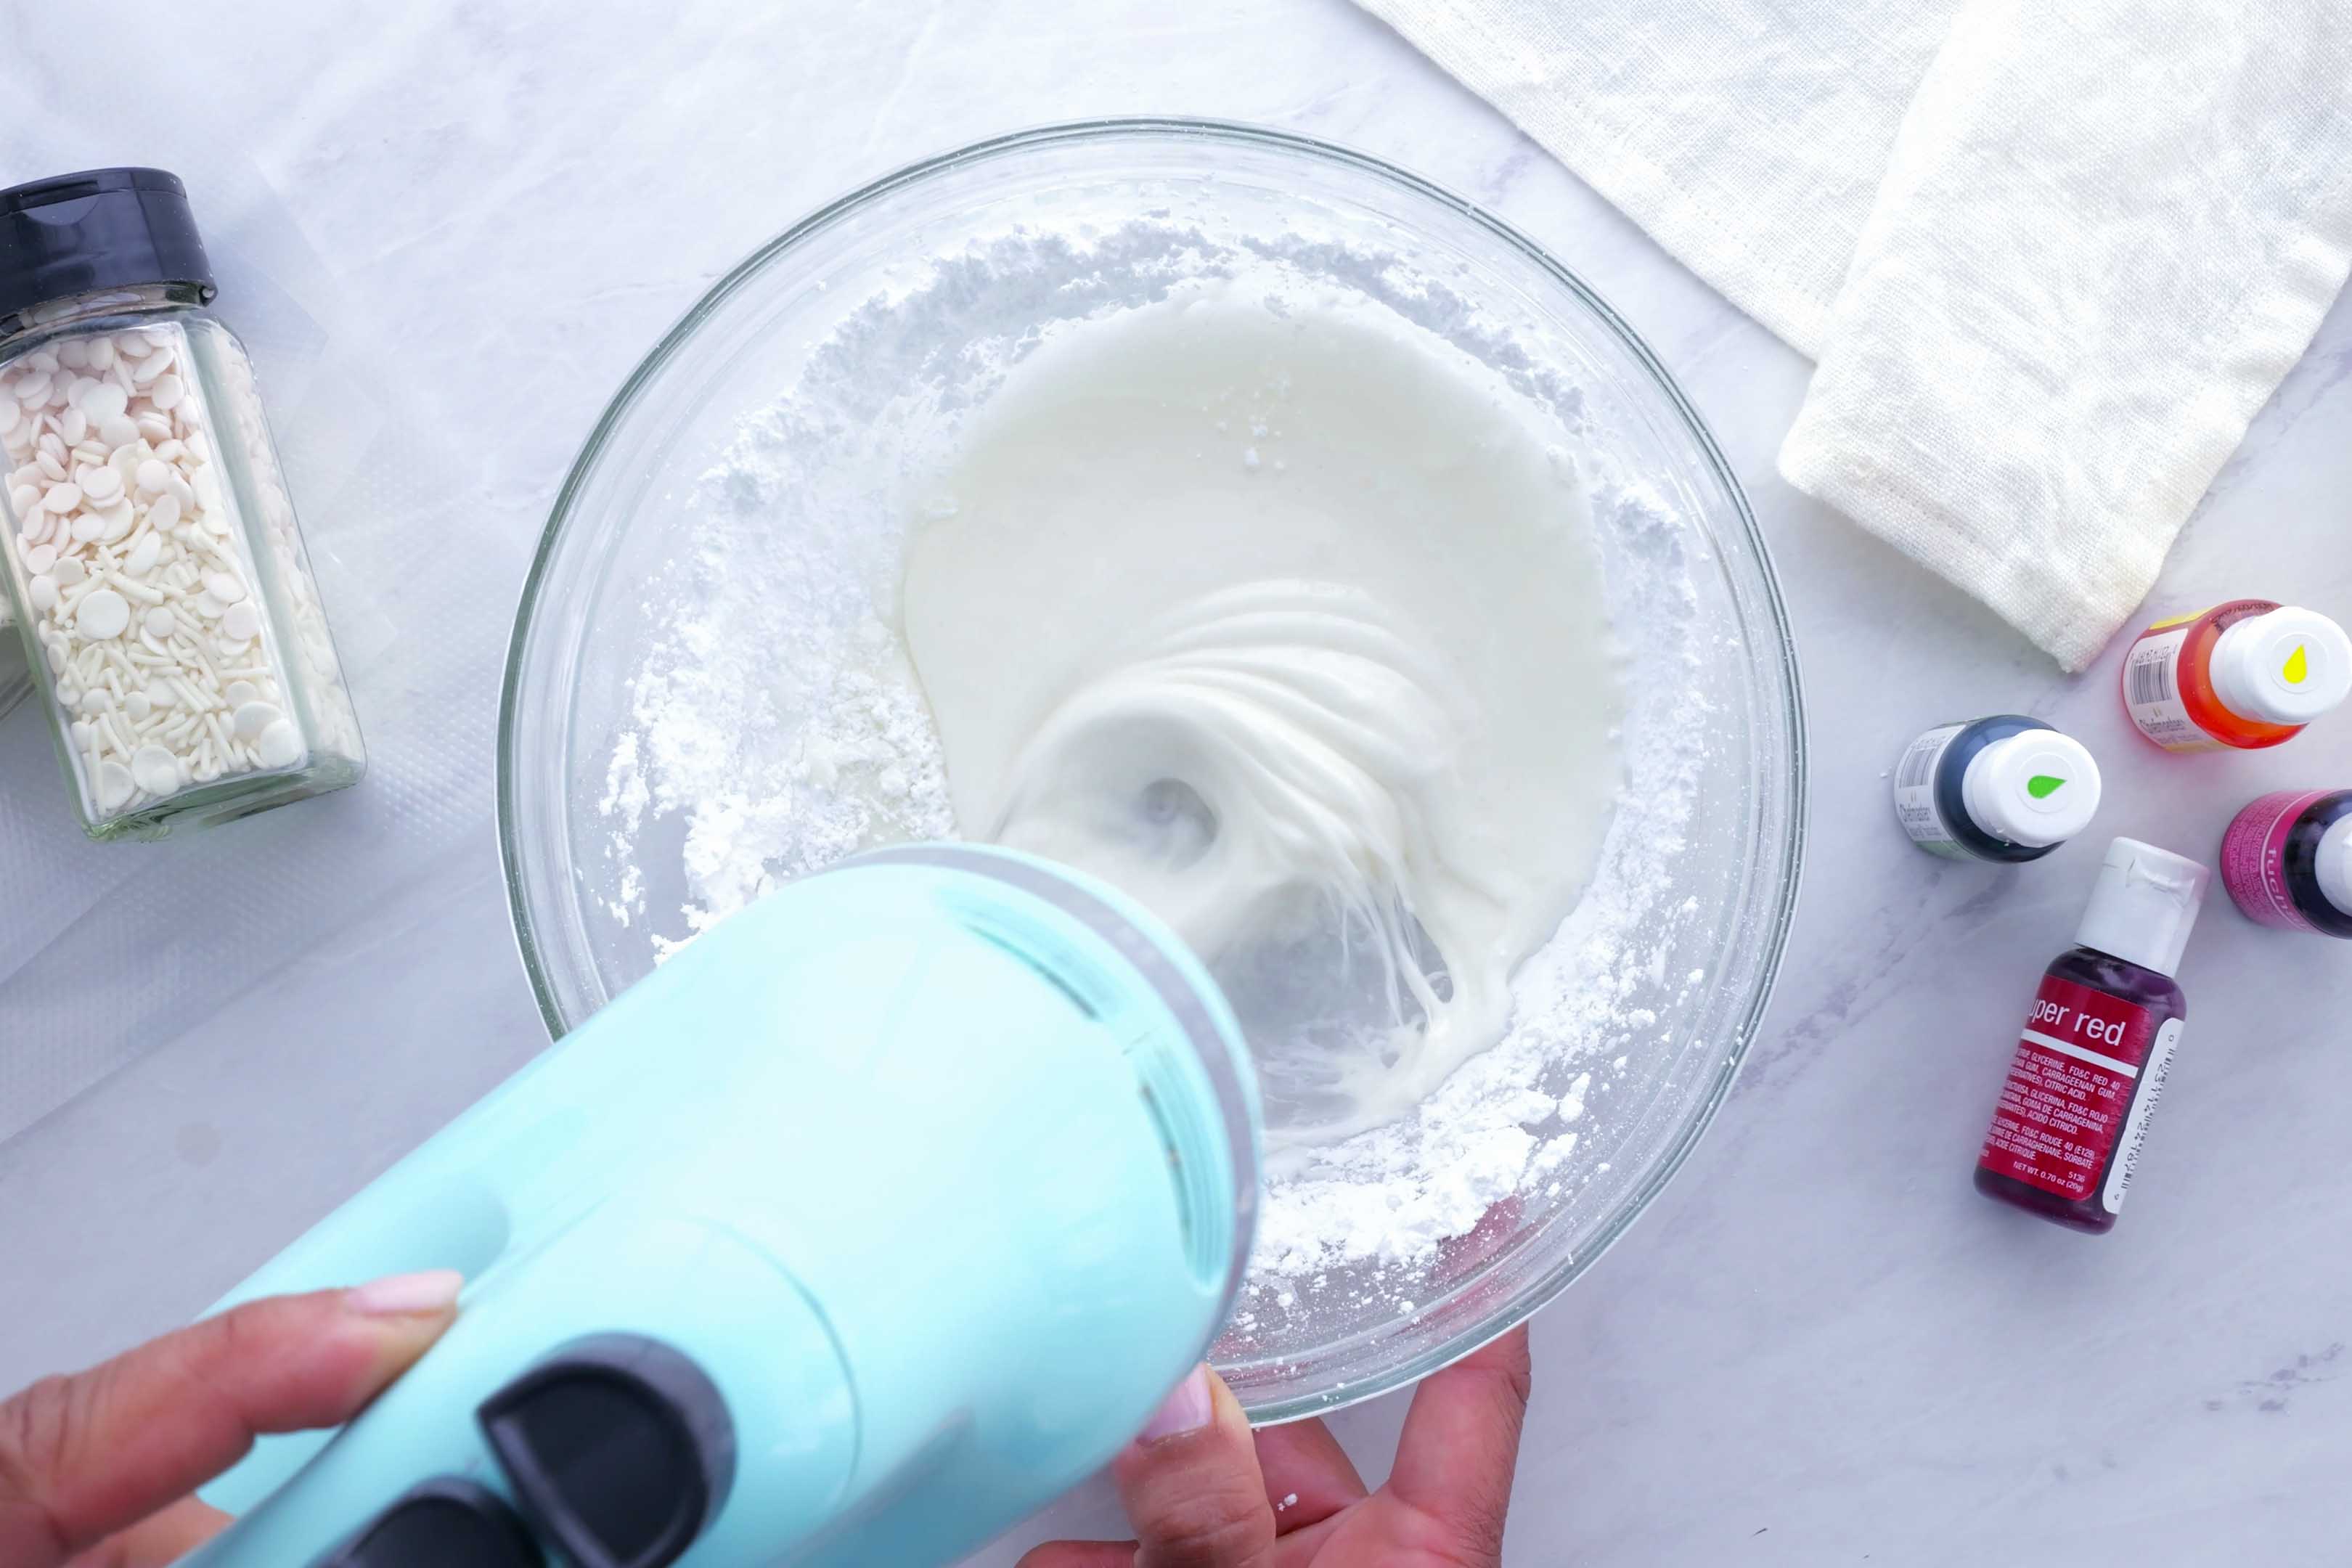 A handheld mixture stirs the icing ingredients.